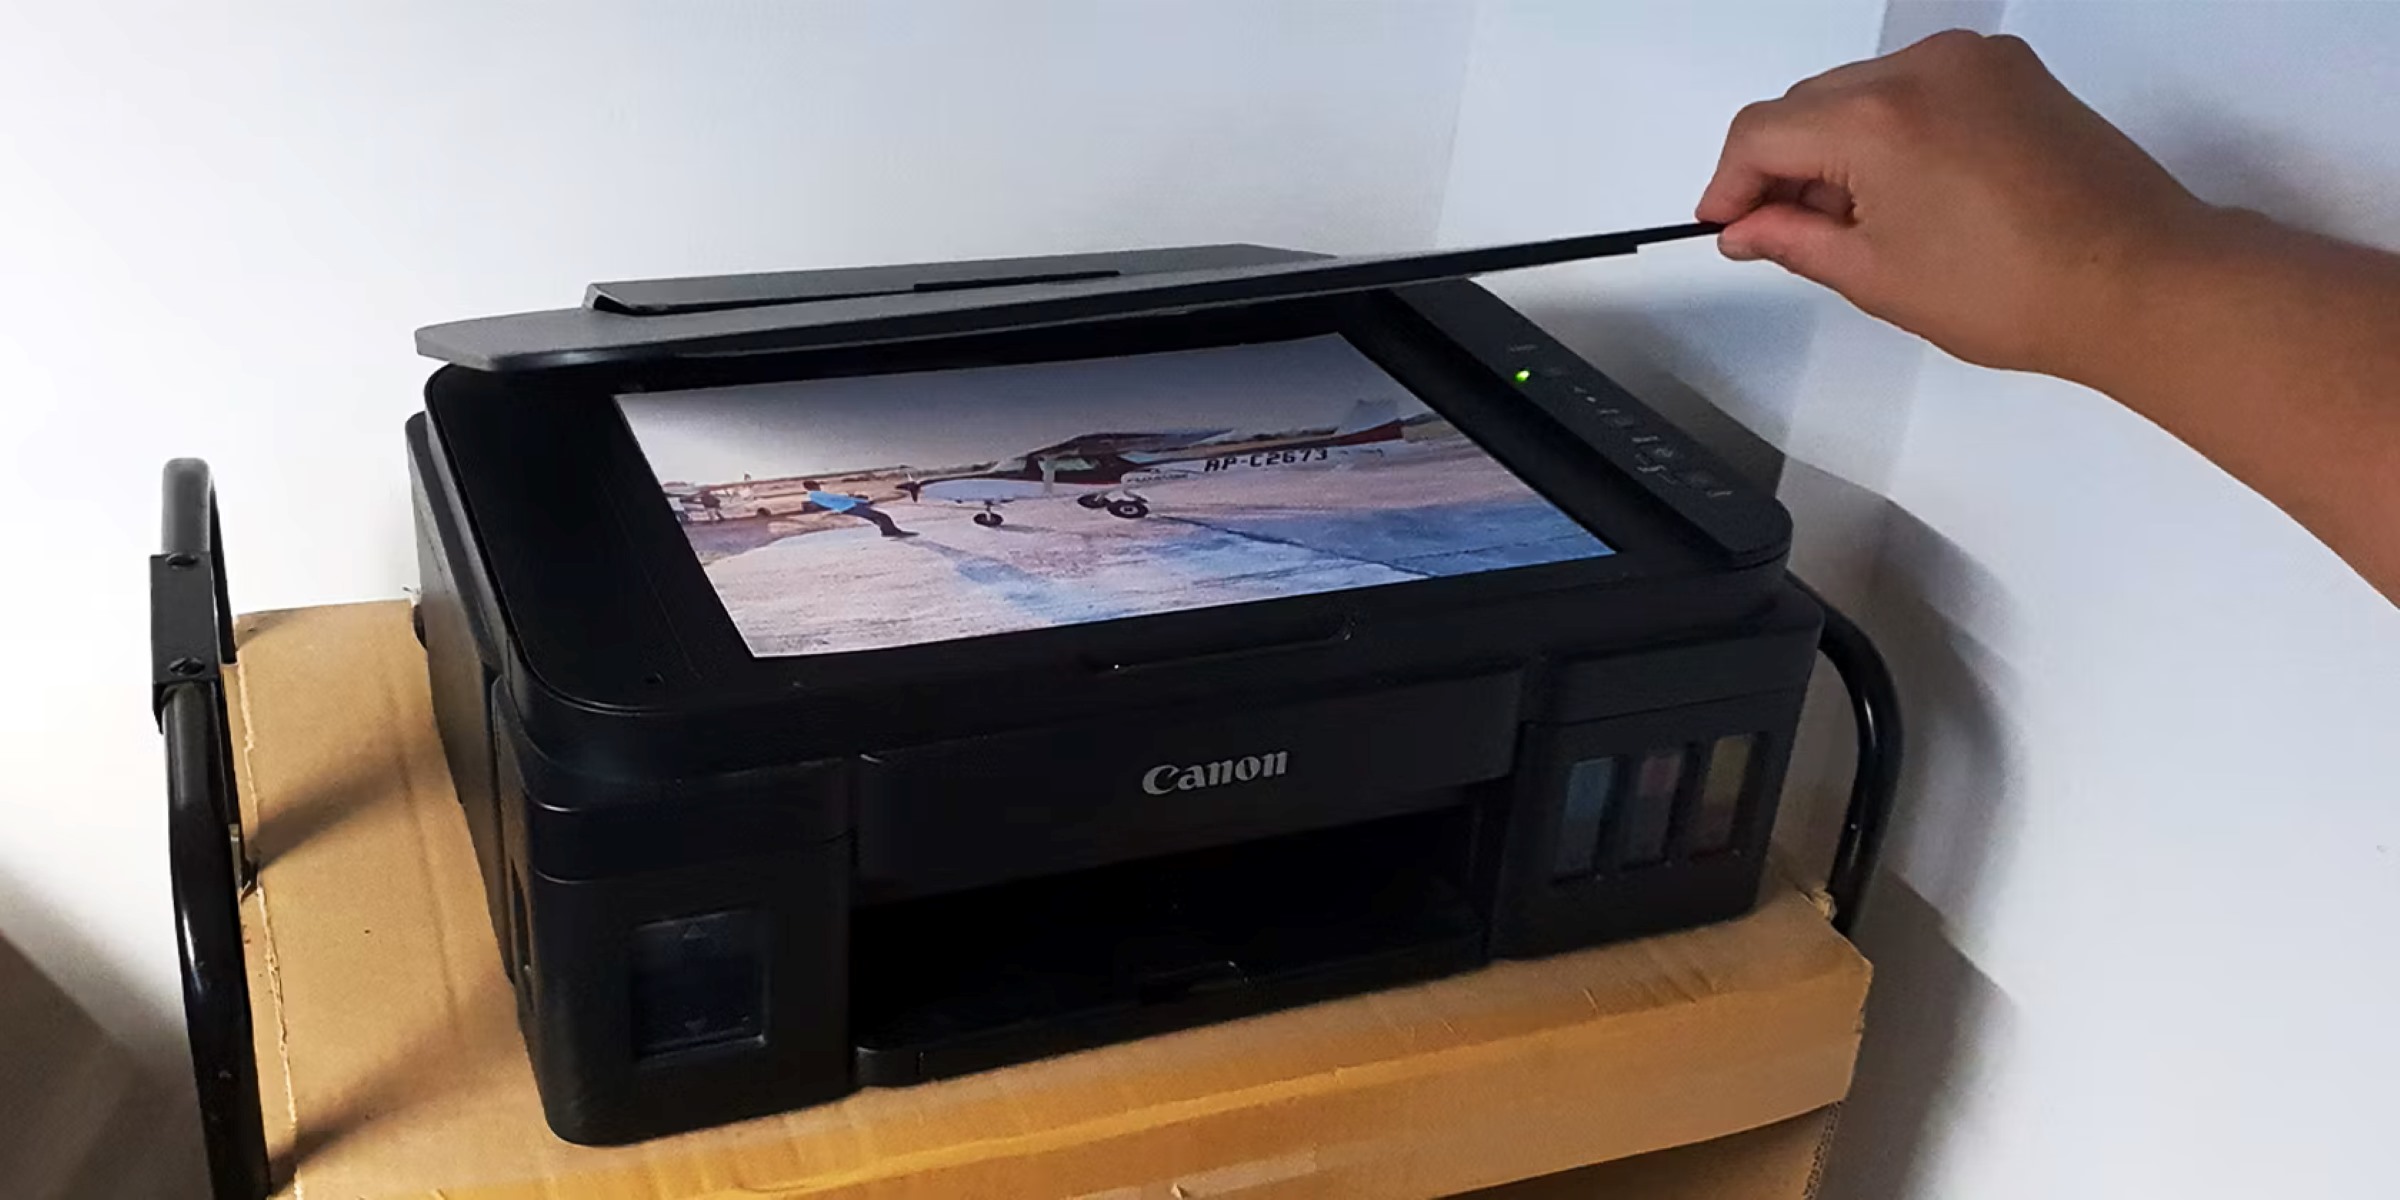 How To Scan Pictures From Printer To Computer